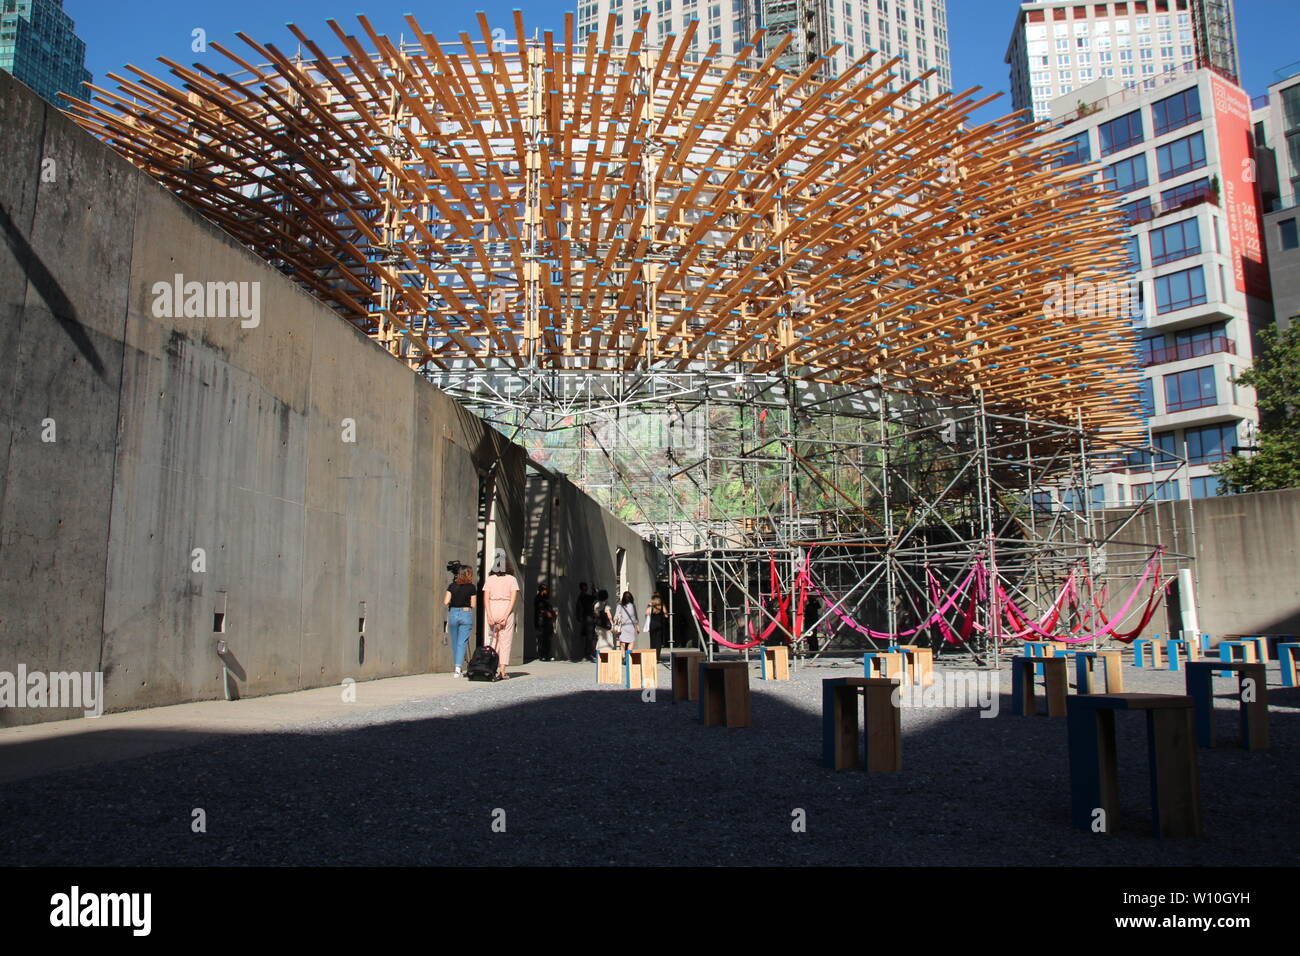 New York, USA. 27th June, 2019. View of the museum MoMA PS1. The  German-Mexican architectural duo Pedro & Juana (Mecky Reuss and Ana Paula  Ruiz Galindo) have built an urban jungle -